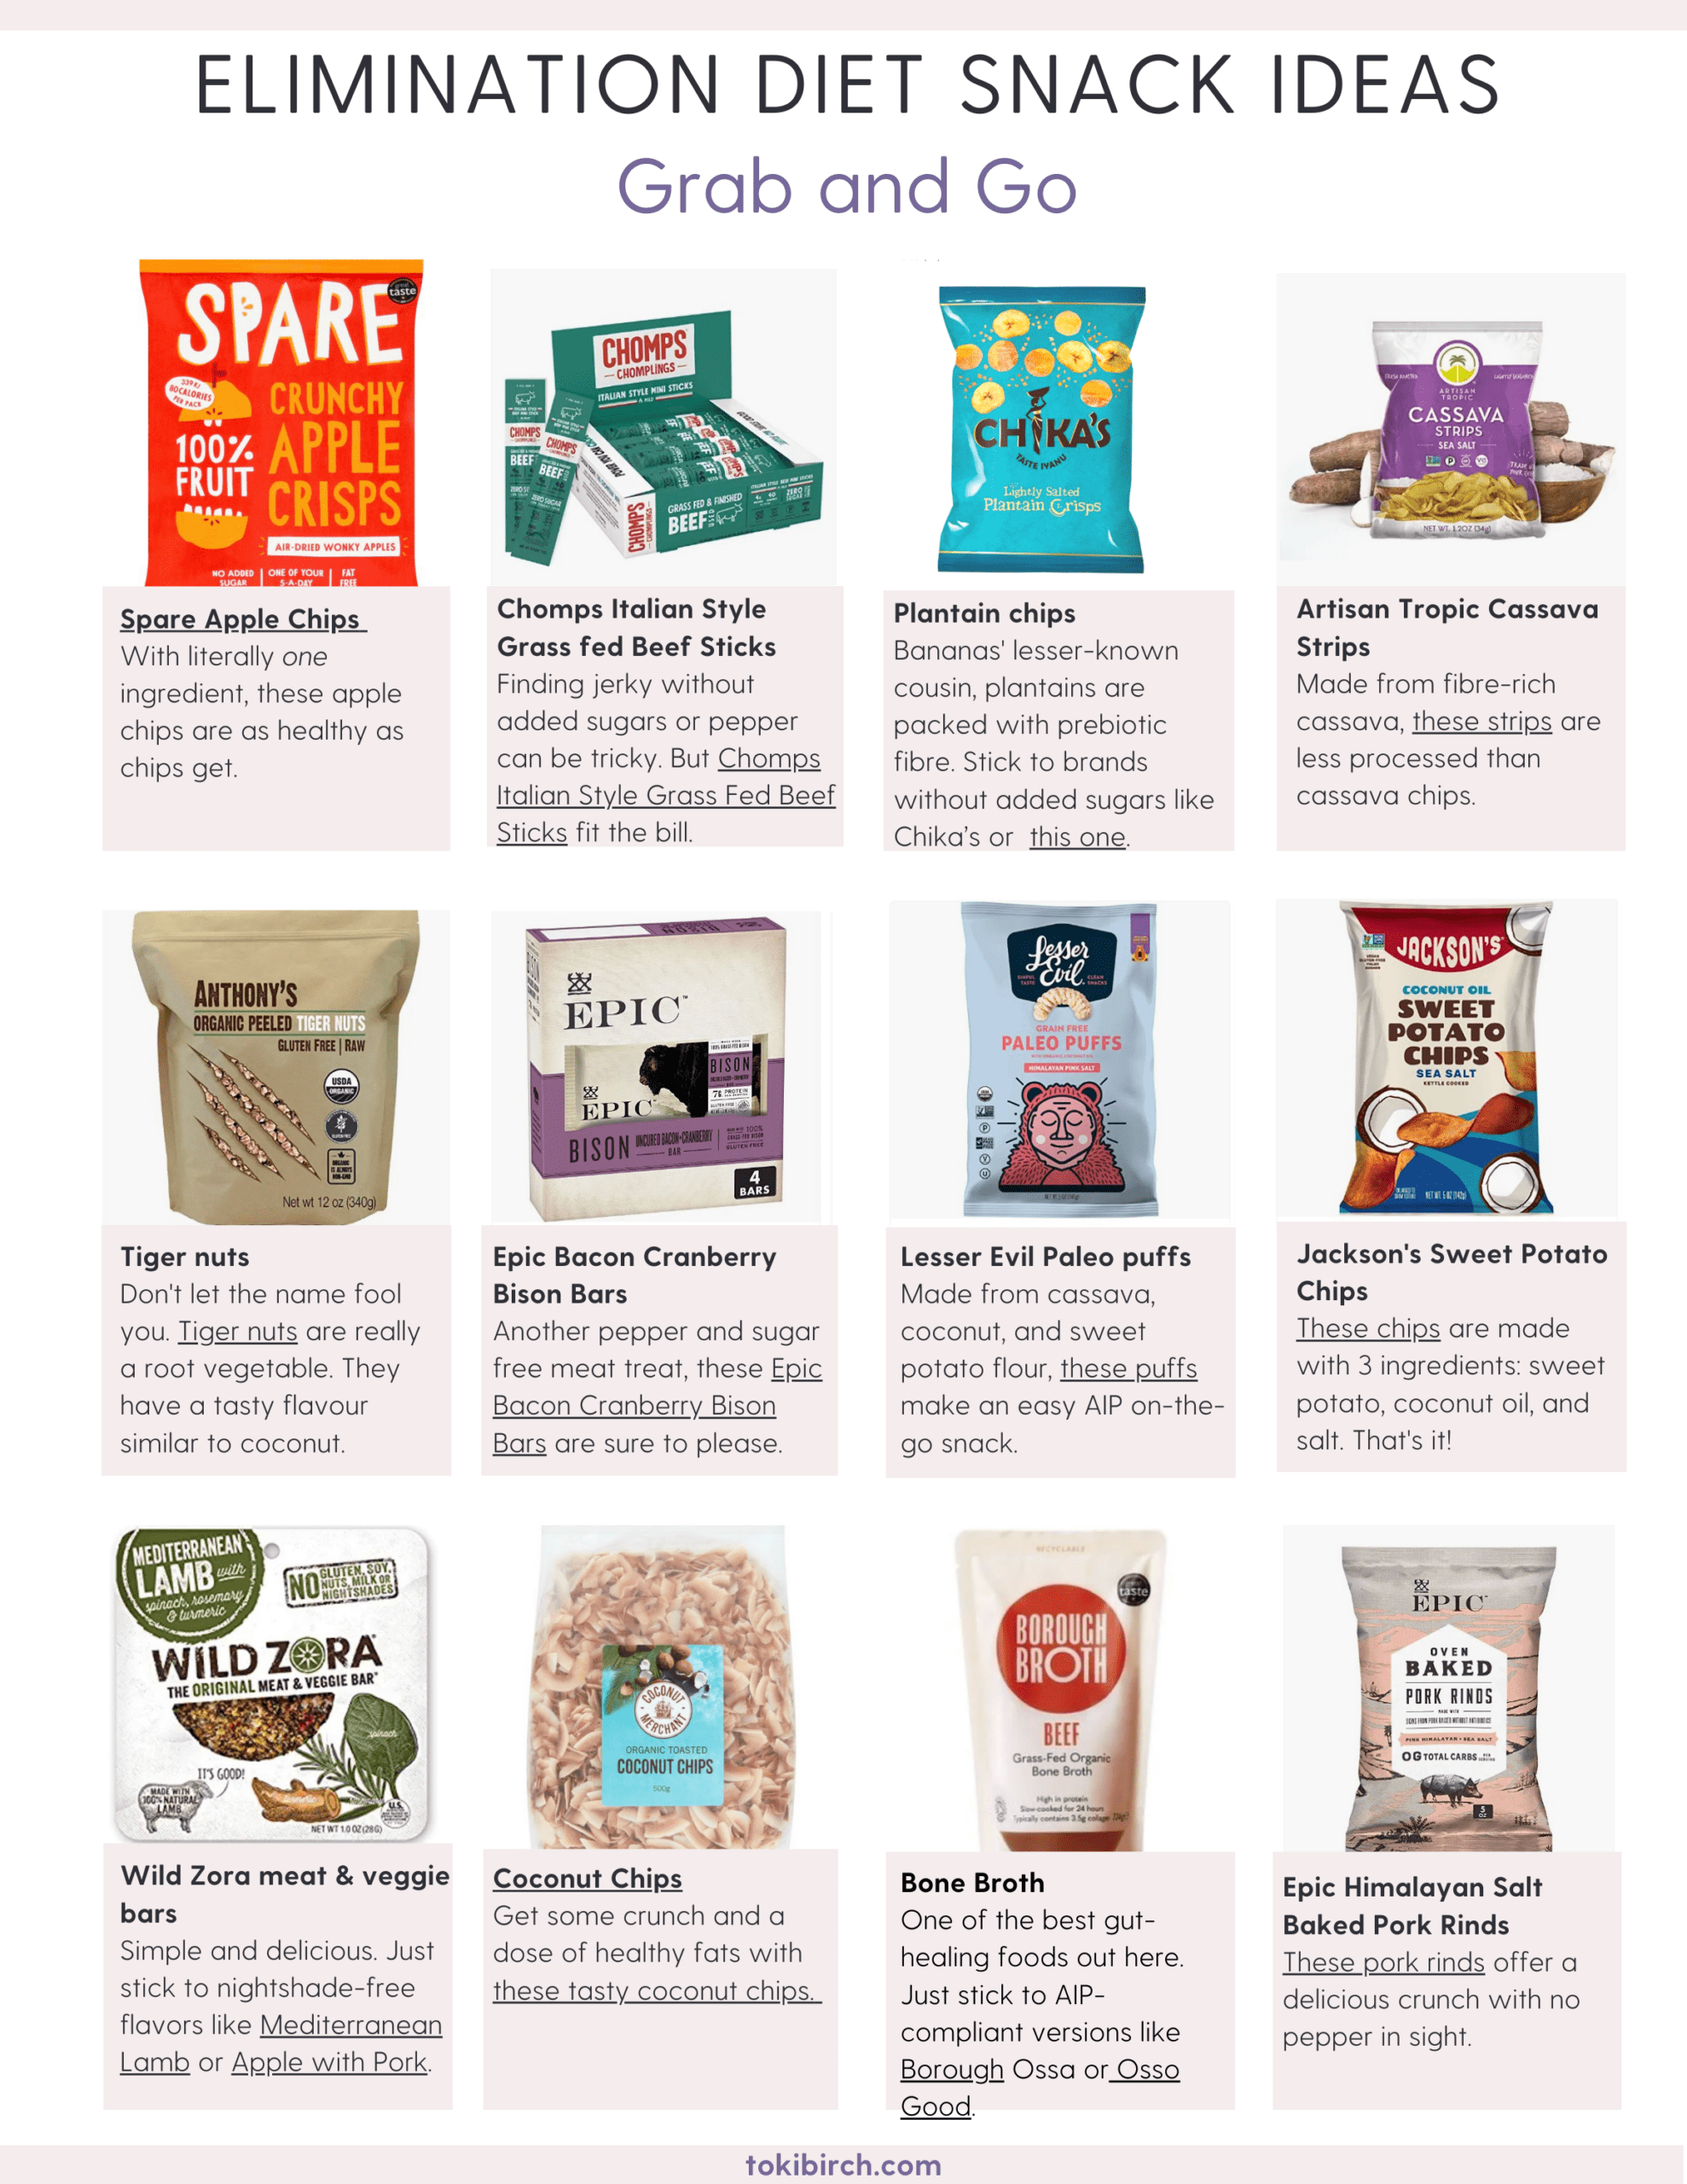 Elimination Diet Grab and Go Snacks